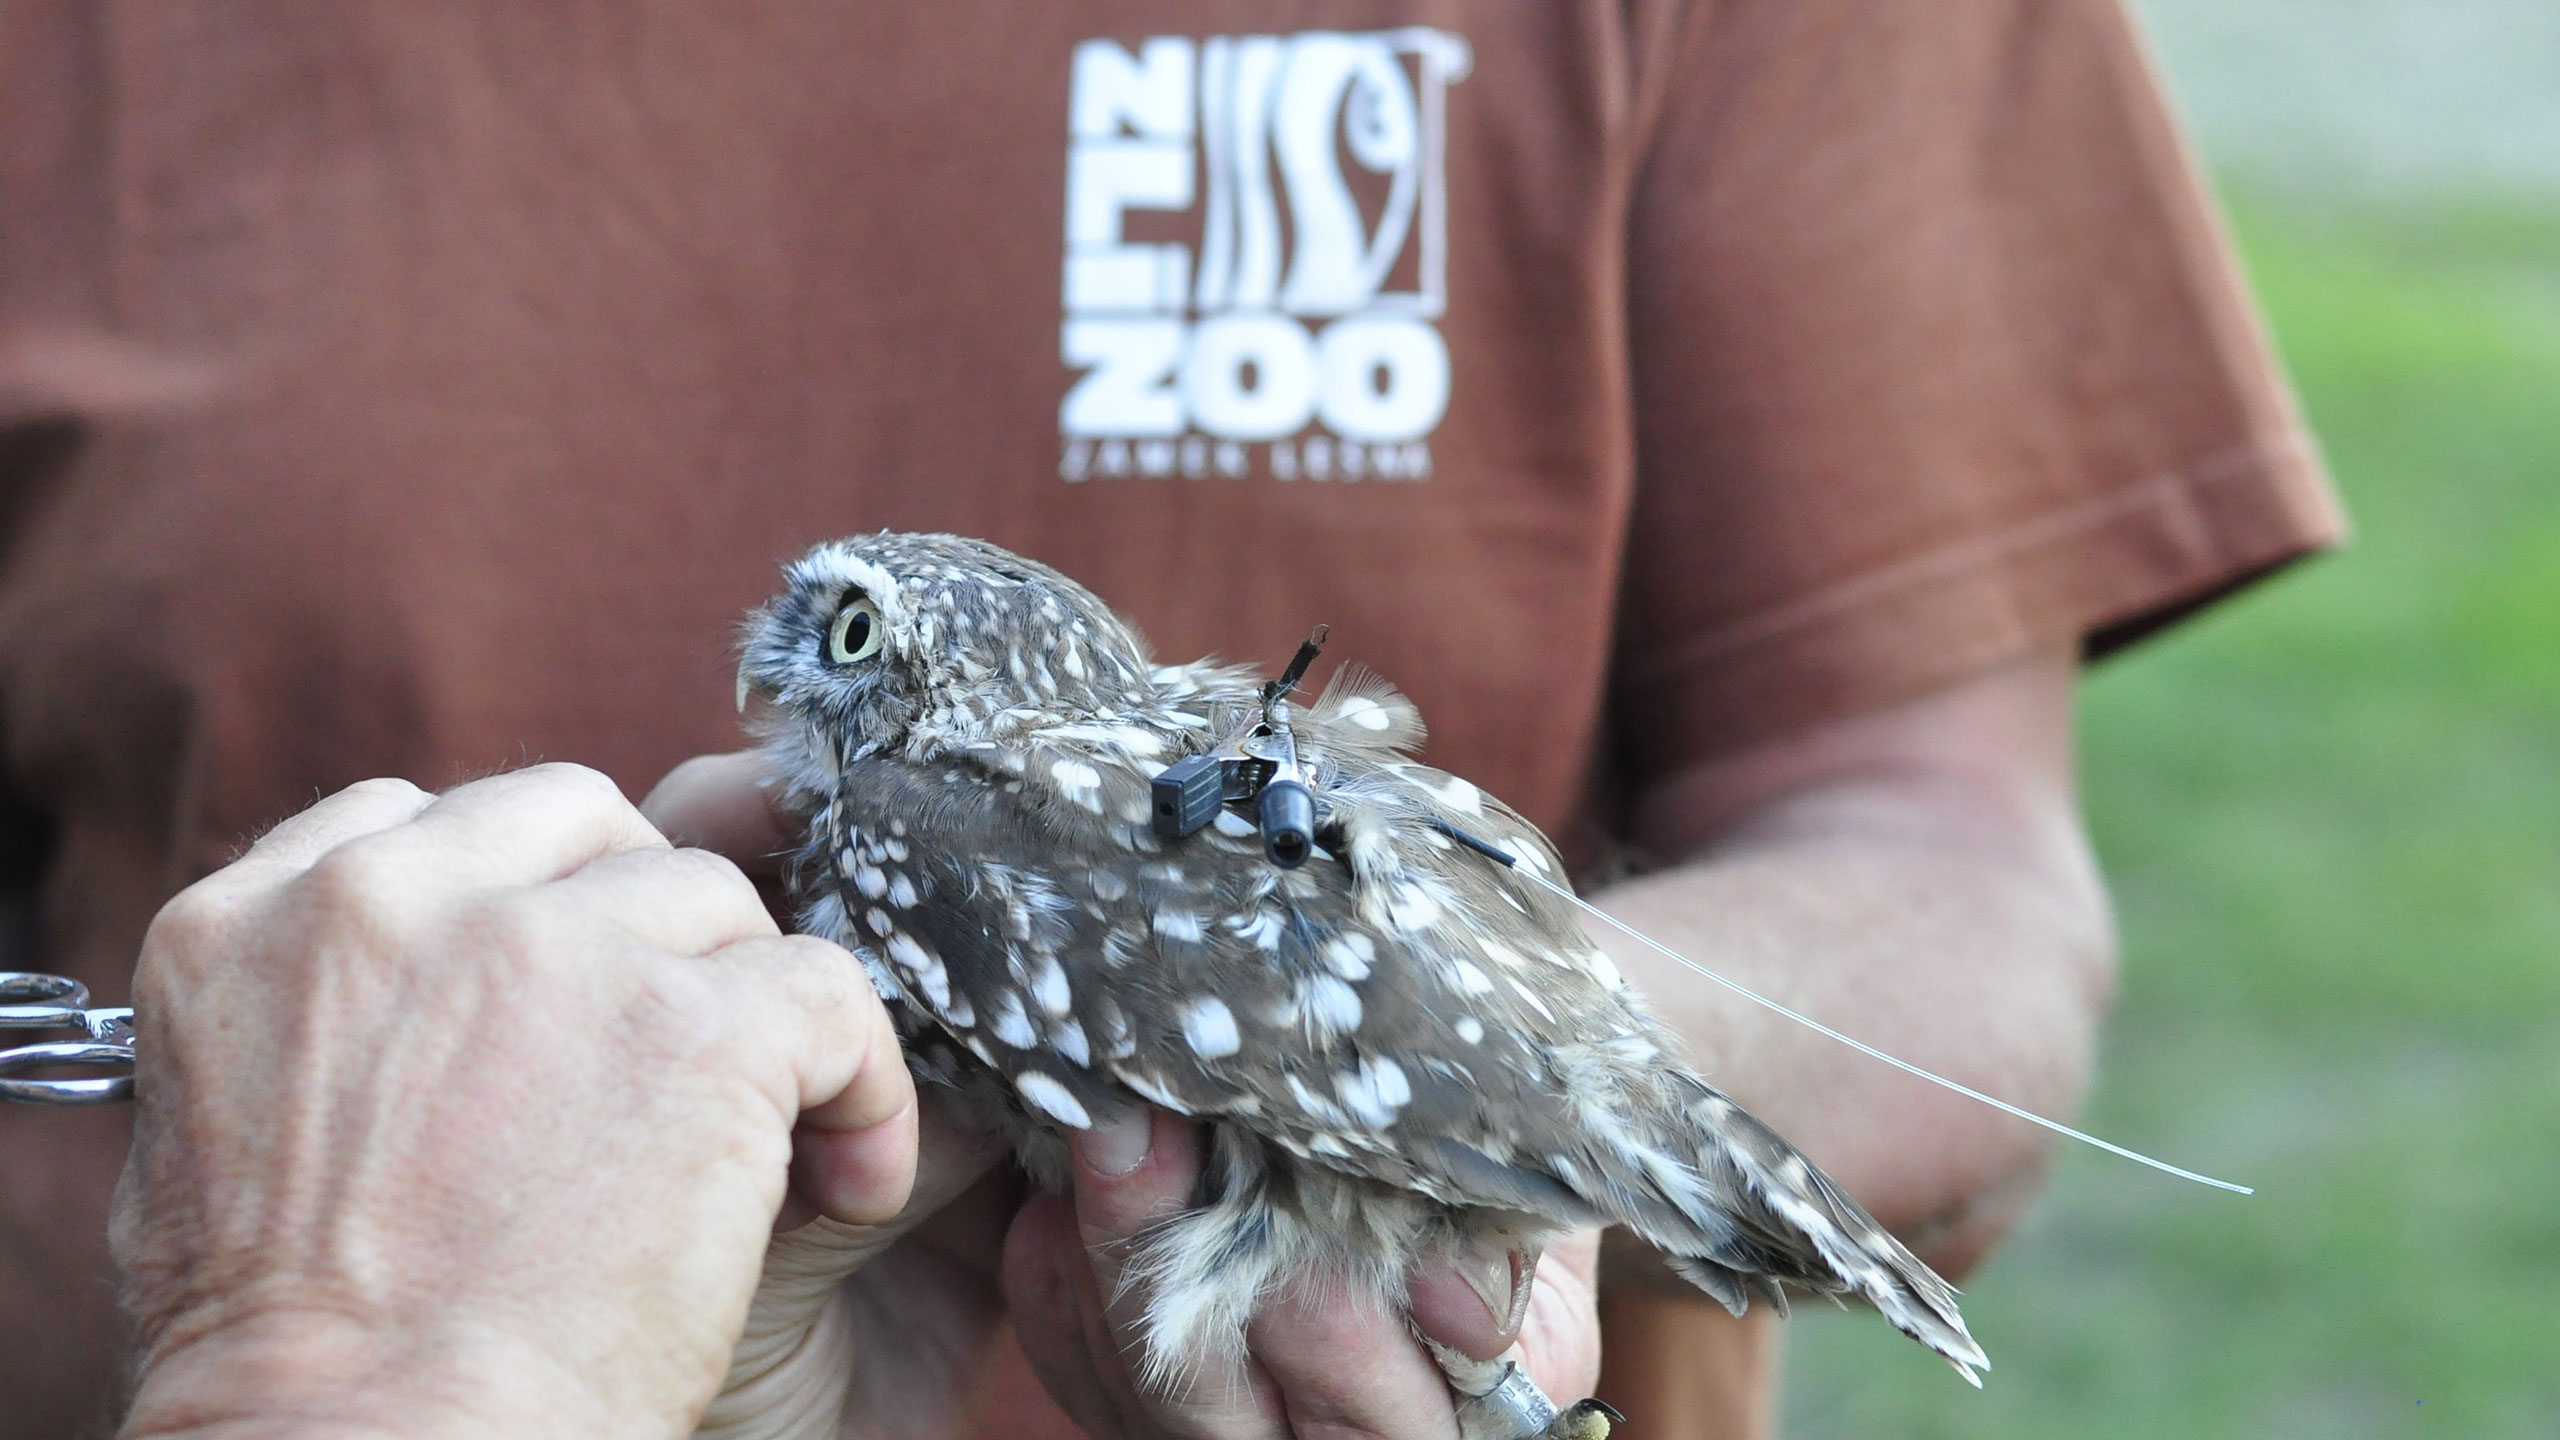 We return little owls into the wild nature